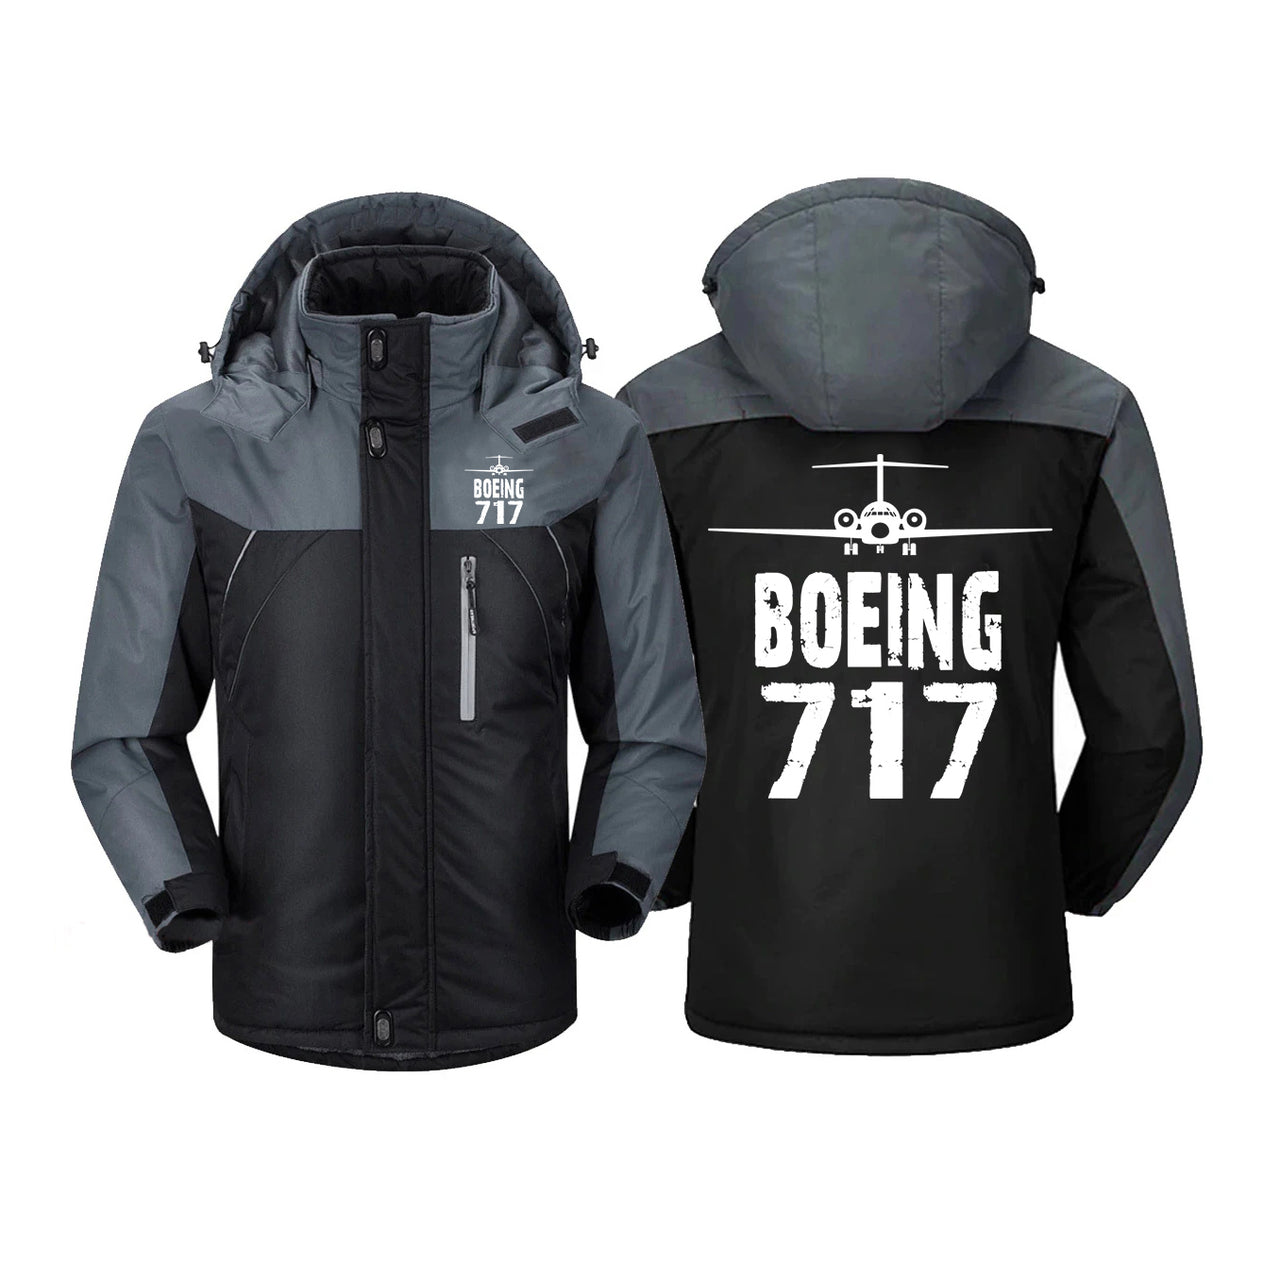 Boeing 717 & Plane Designed Thick Winter Jackets